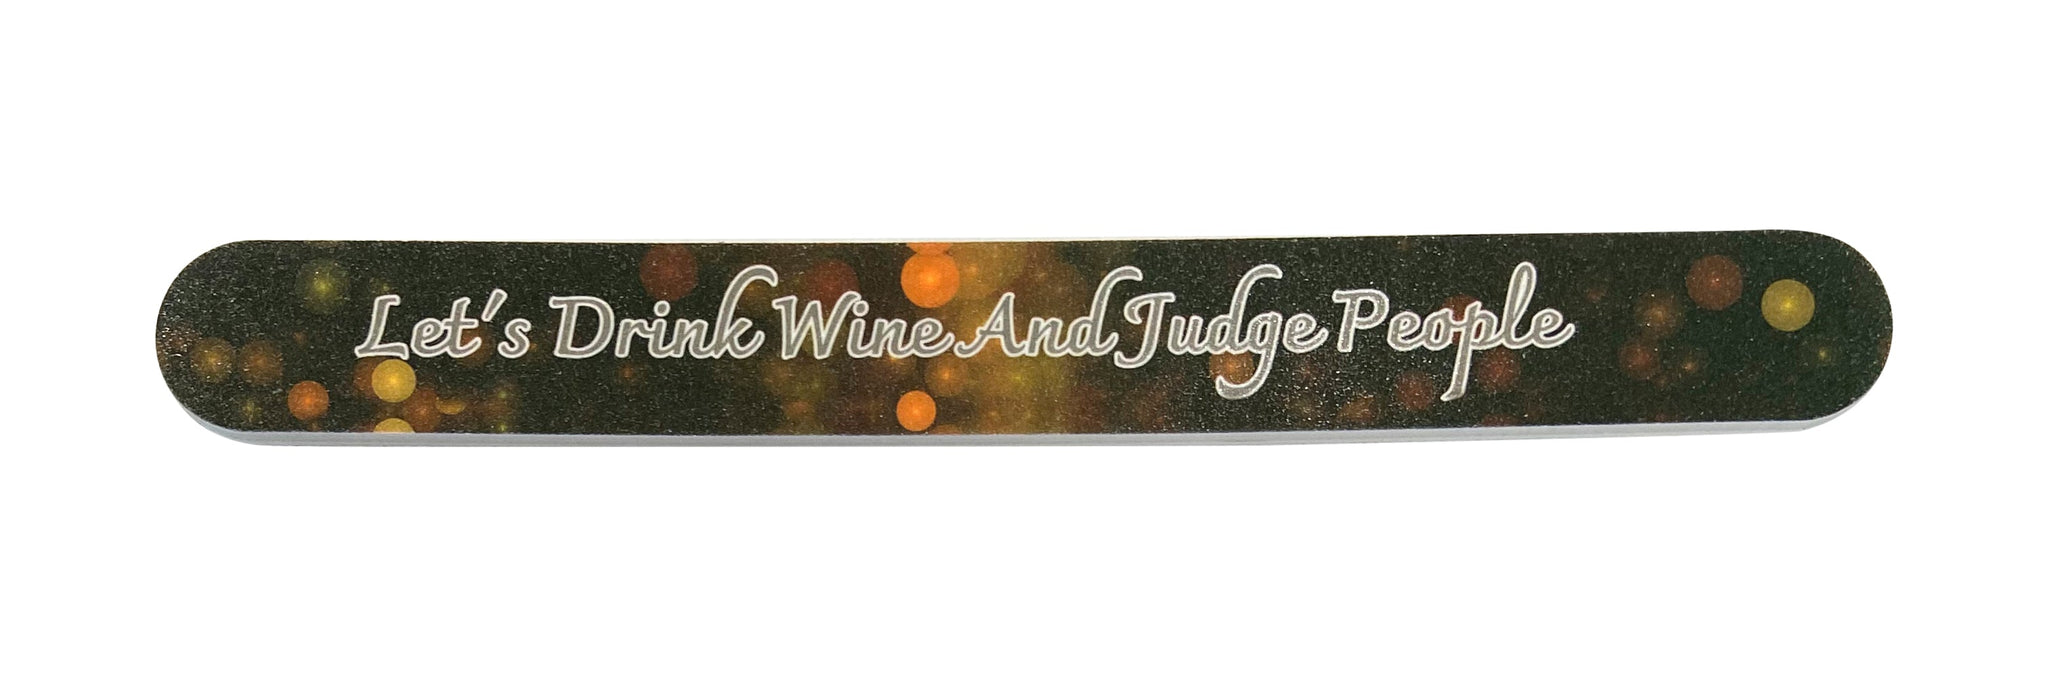 Let's Drink Wine and Judge People Nail File